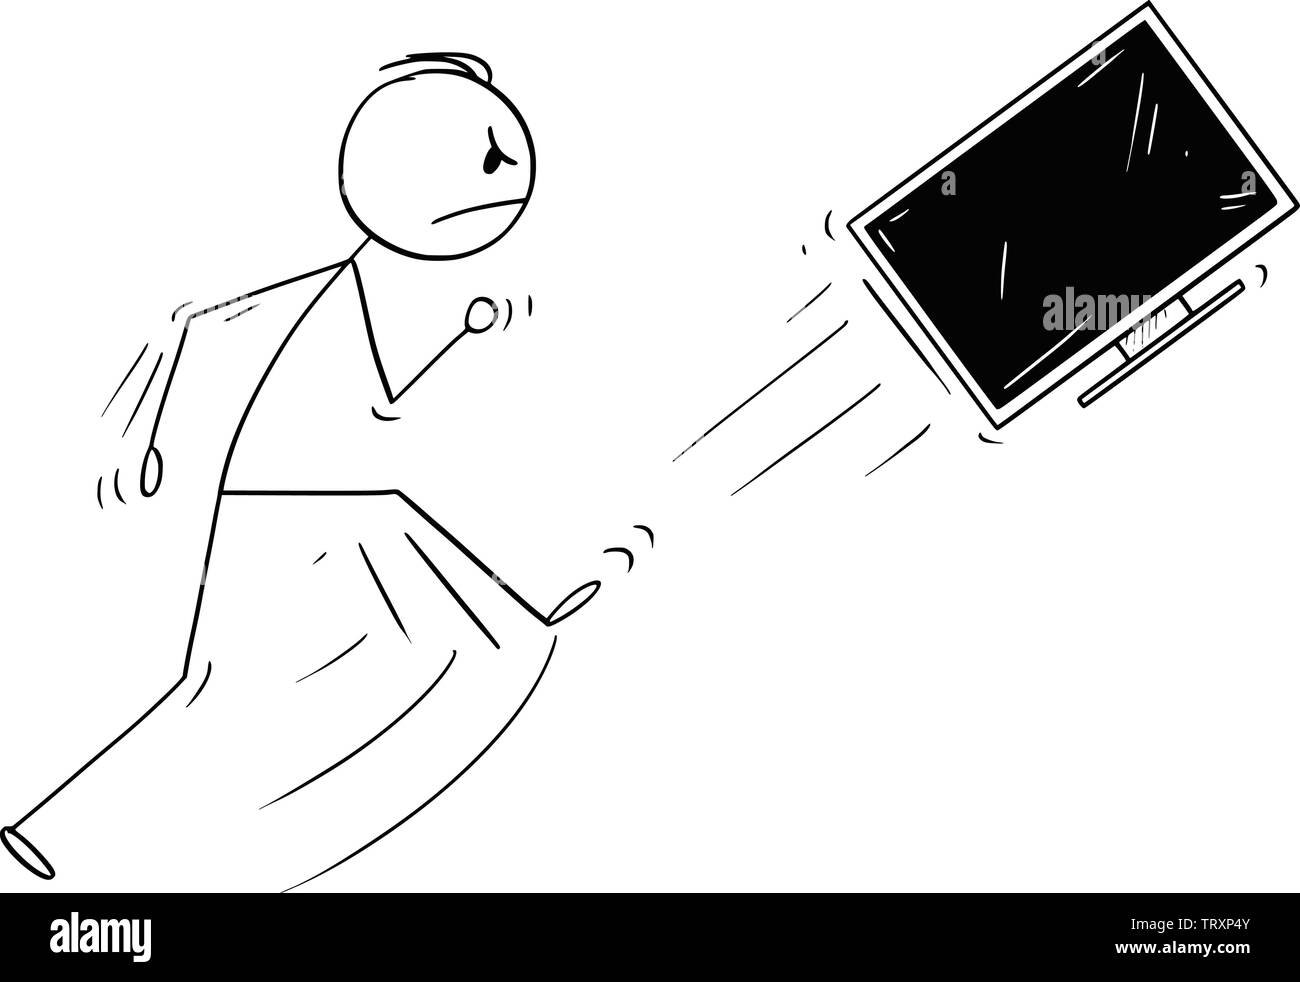 Vector cartoon stick figure drawing conceptual illustration of angry man kicking out the TV, television or computer monitor or screen. Broken technology concept. Stock Vector